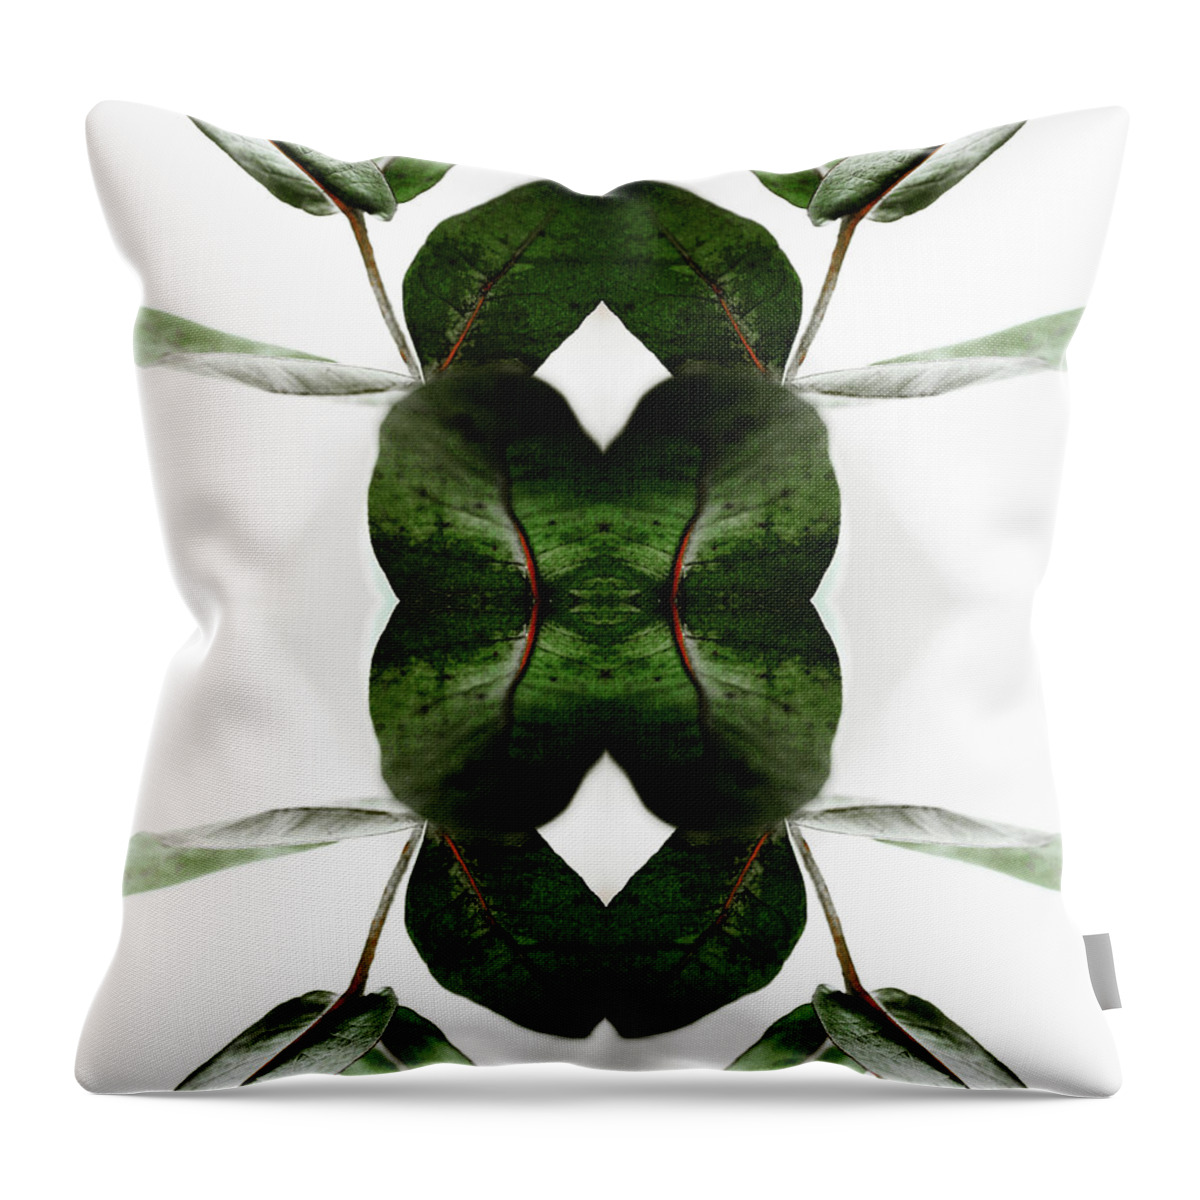 Tranquility Throw Pillow featuring the photograph Eucalyptus Leaves by Silvia Otte